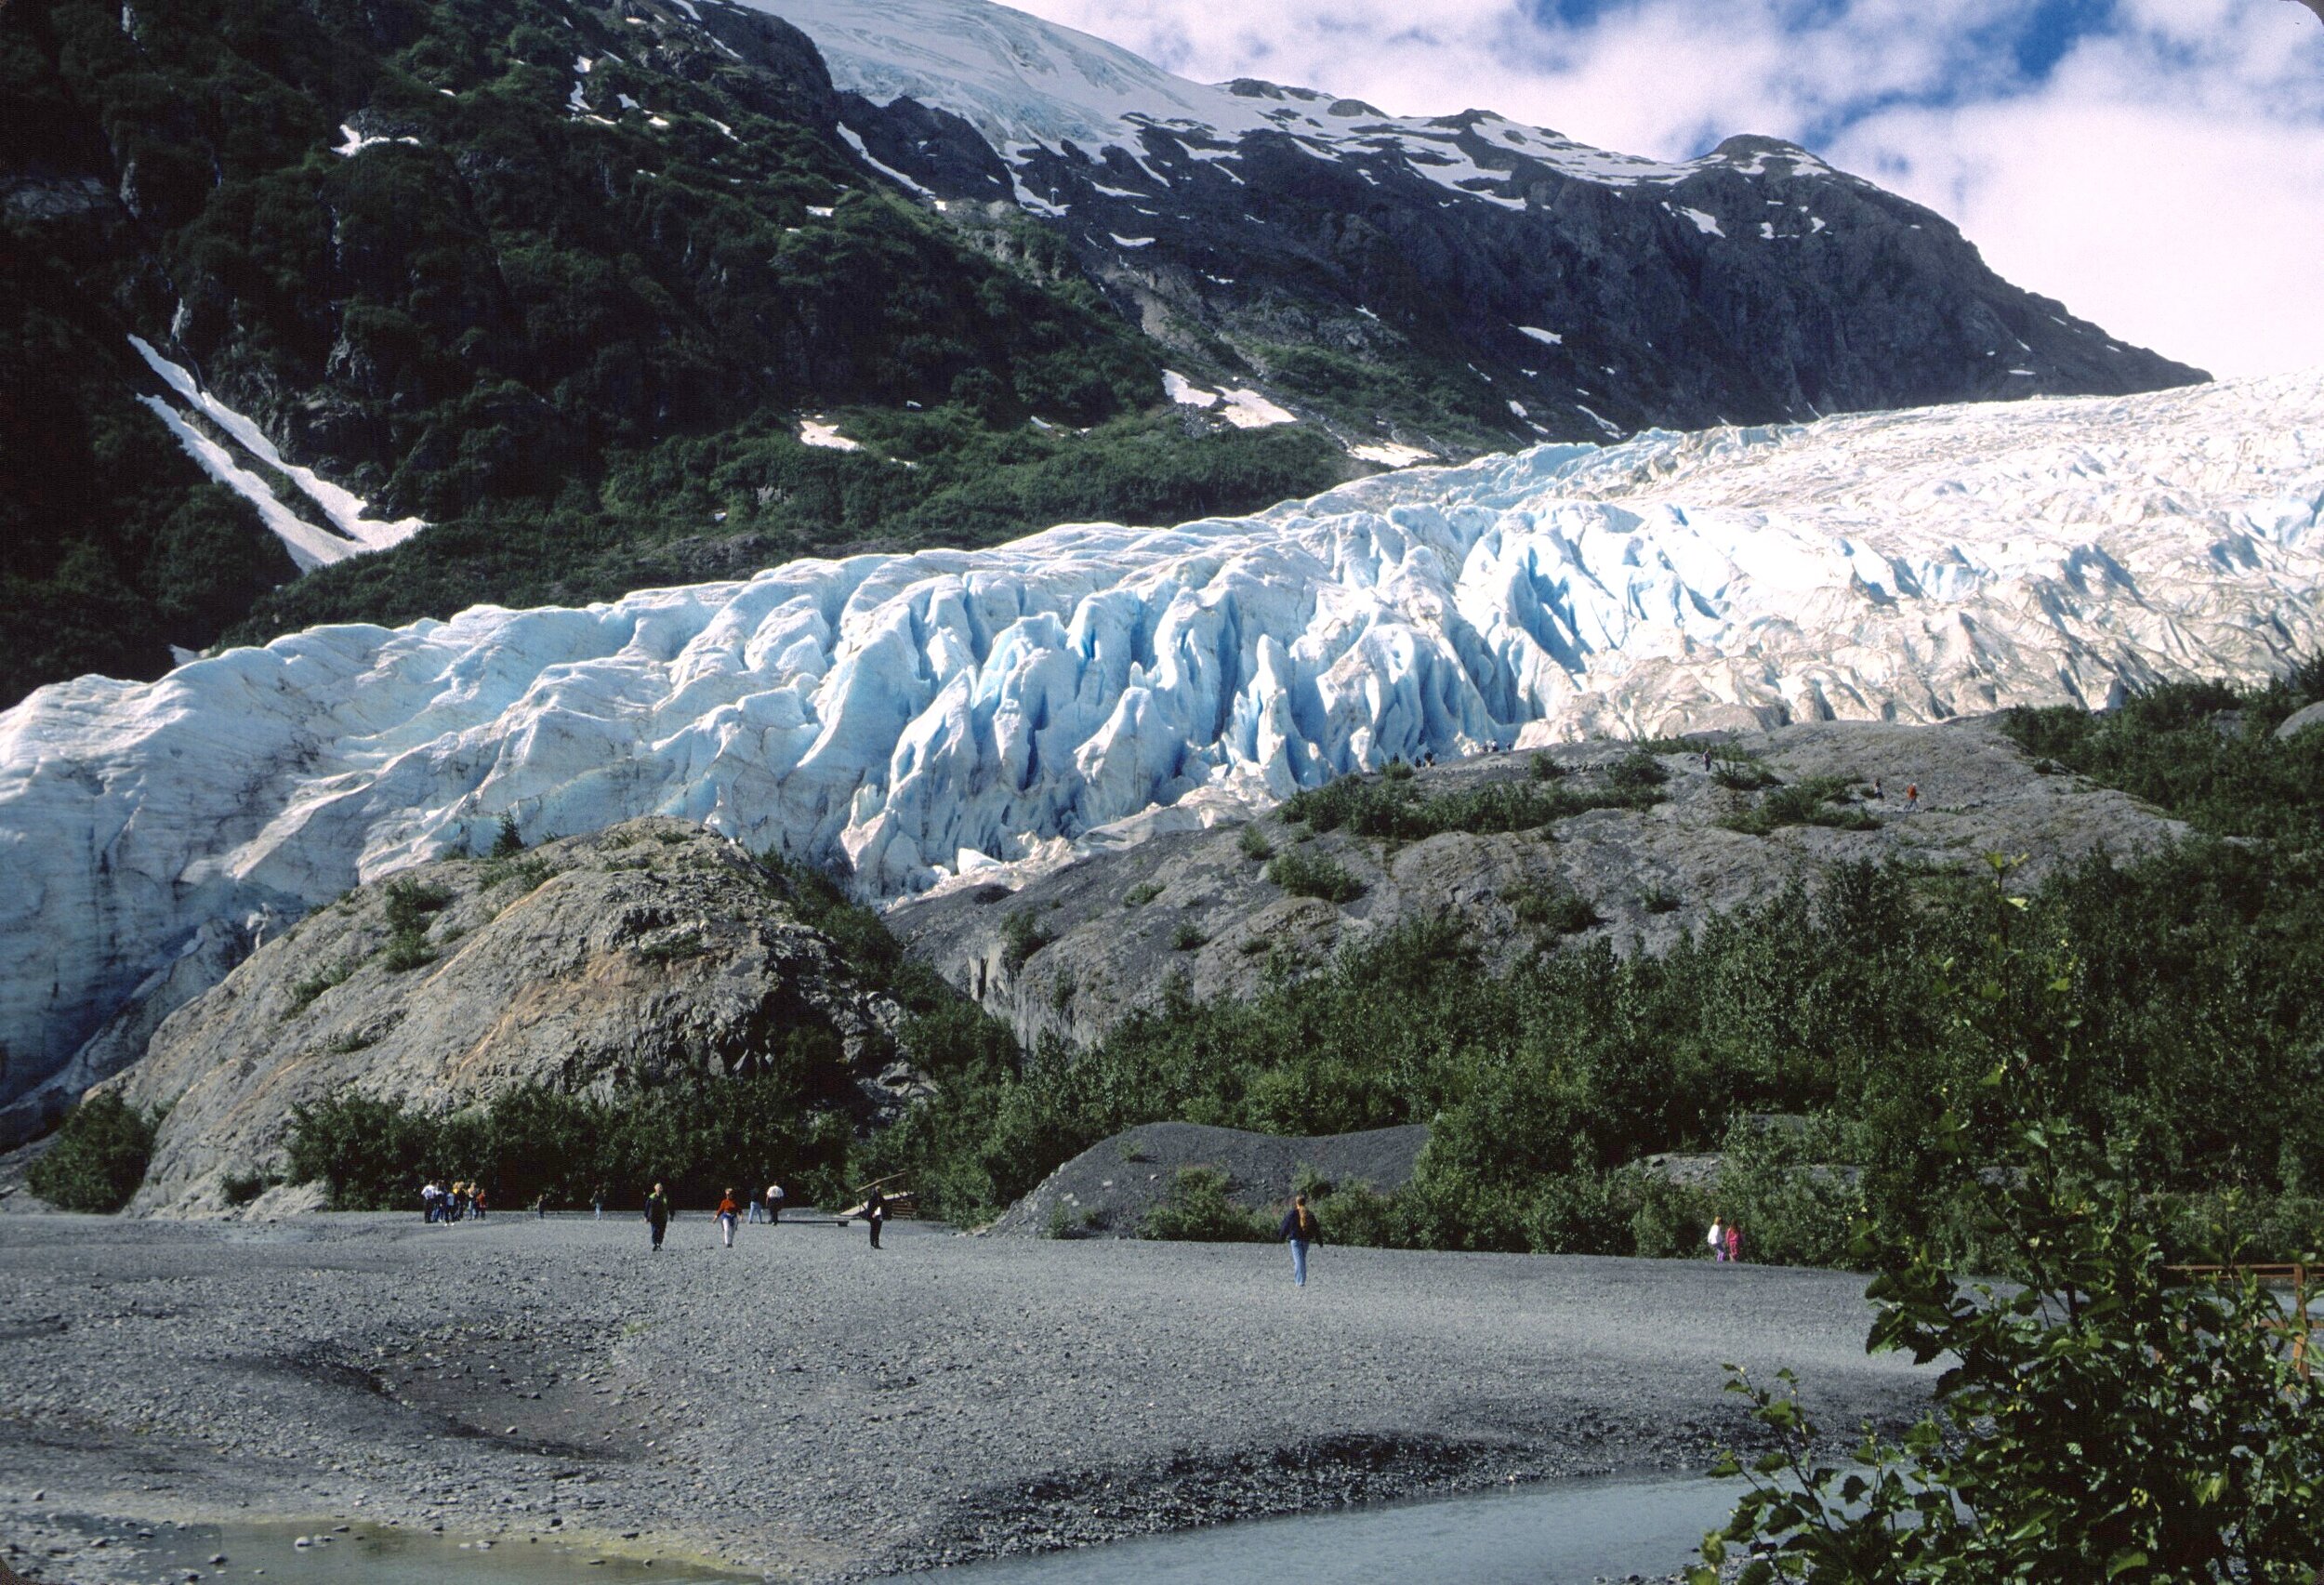 Exit Glacier provides an opportunity to see and appreciate the power of glaciers.